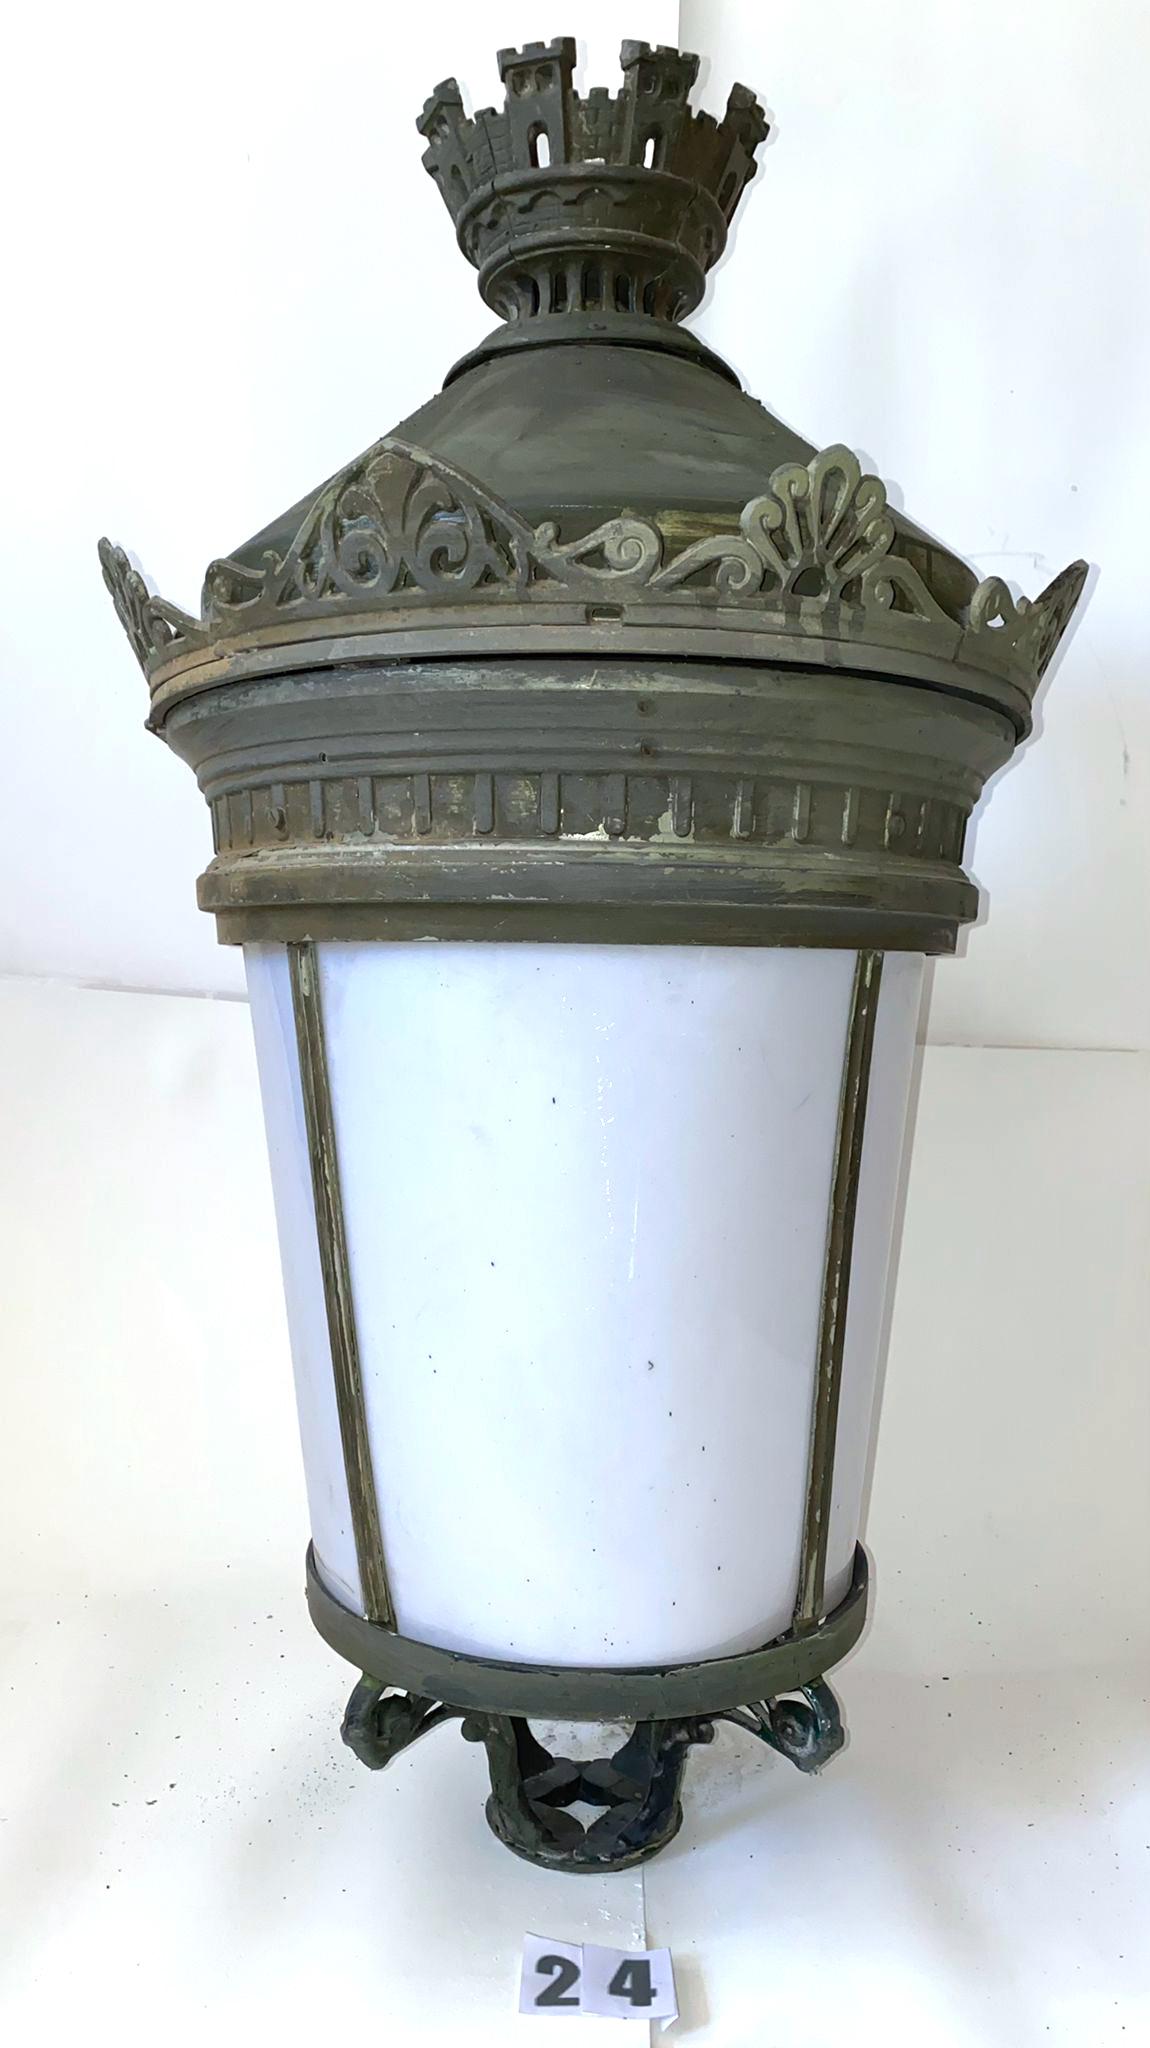 The Lantern pictured in this listing is Lantern #24

Details for This Lantern (Lantern #24):
• color is dark green
• cast aluminum and plexiglass
• weighs approximately 22 lbs
• is a hanging lantern and casts its light outward
• opens from